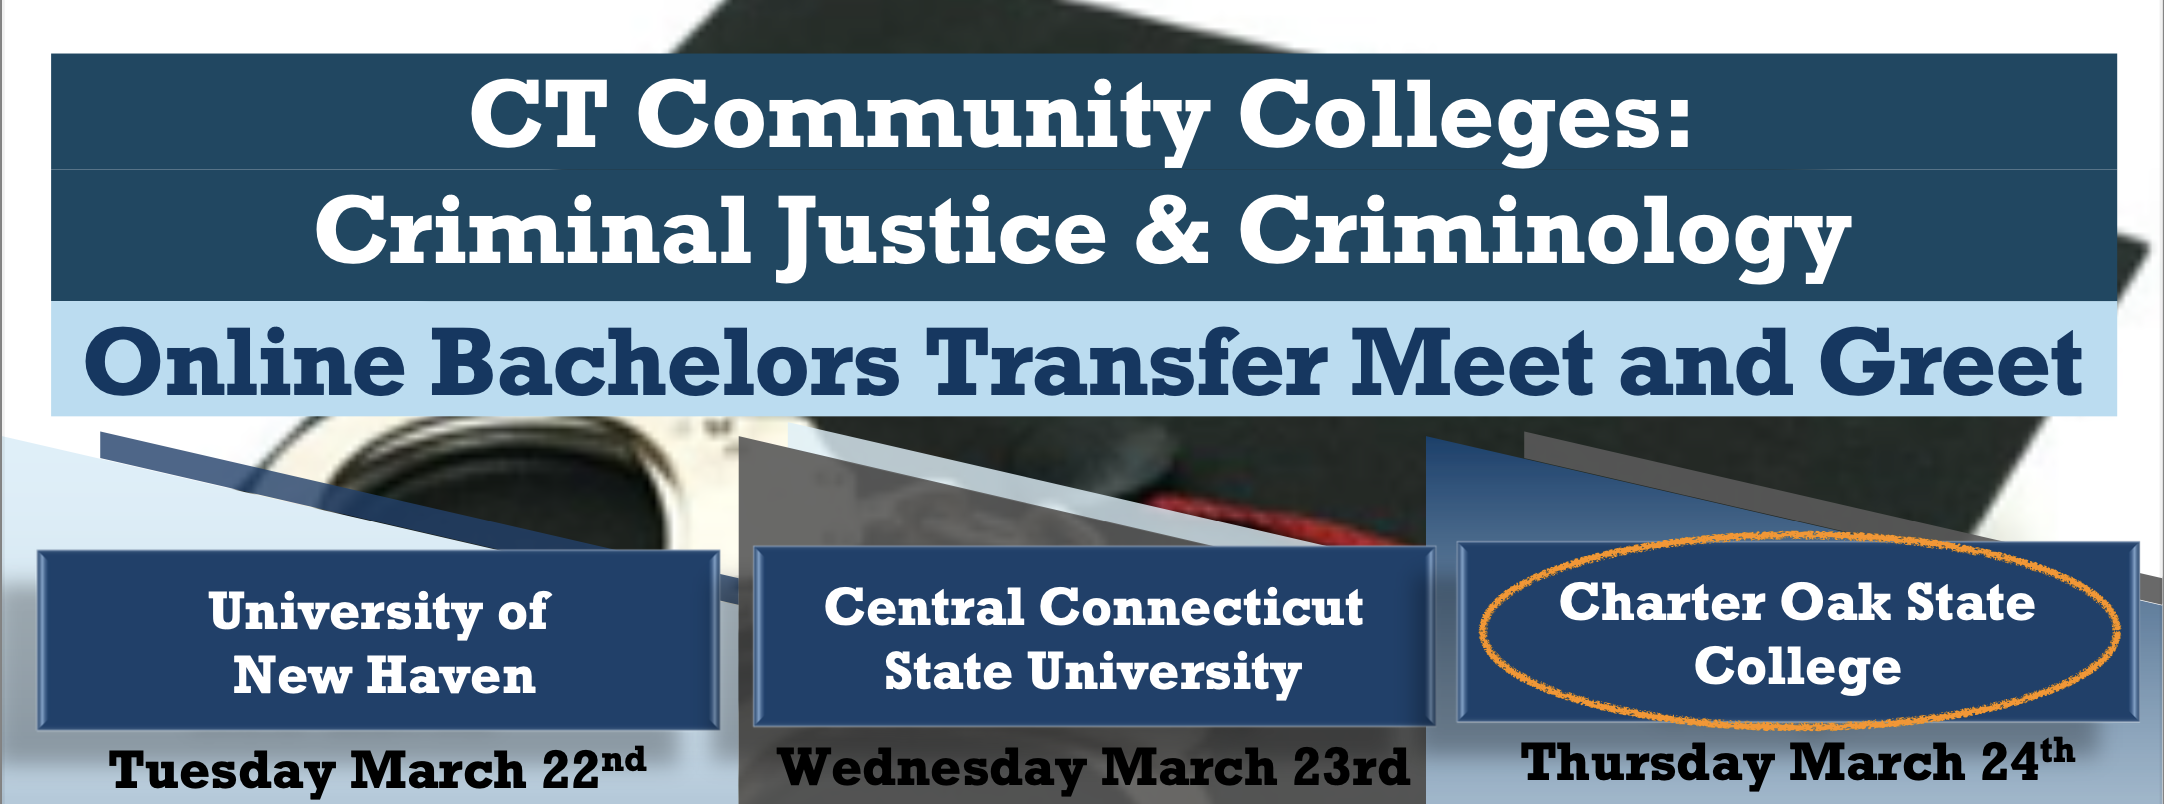 Header for Charter Oak State College's portion of the CT Community College Colleges Criminal Justice & Criminology Online Bachelors Transfer Meet and Greet on March 24, 2022